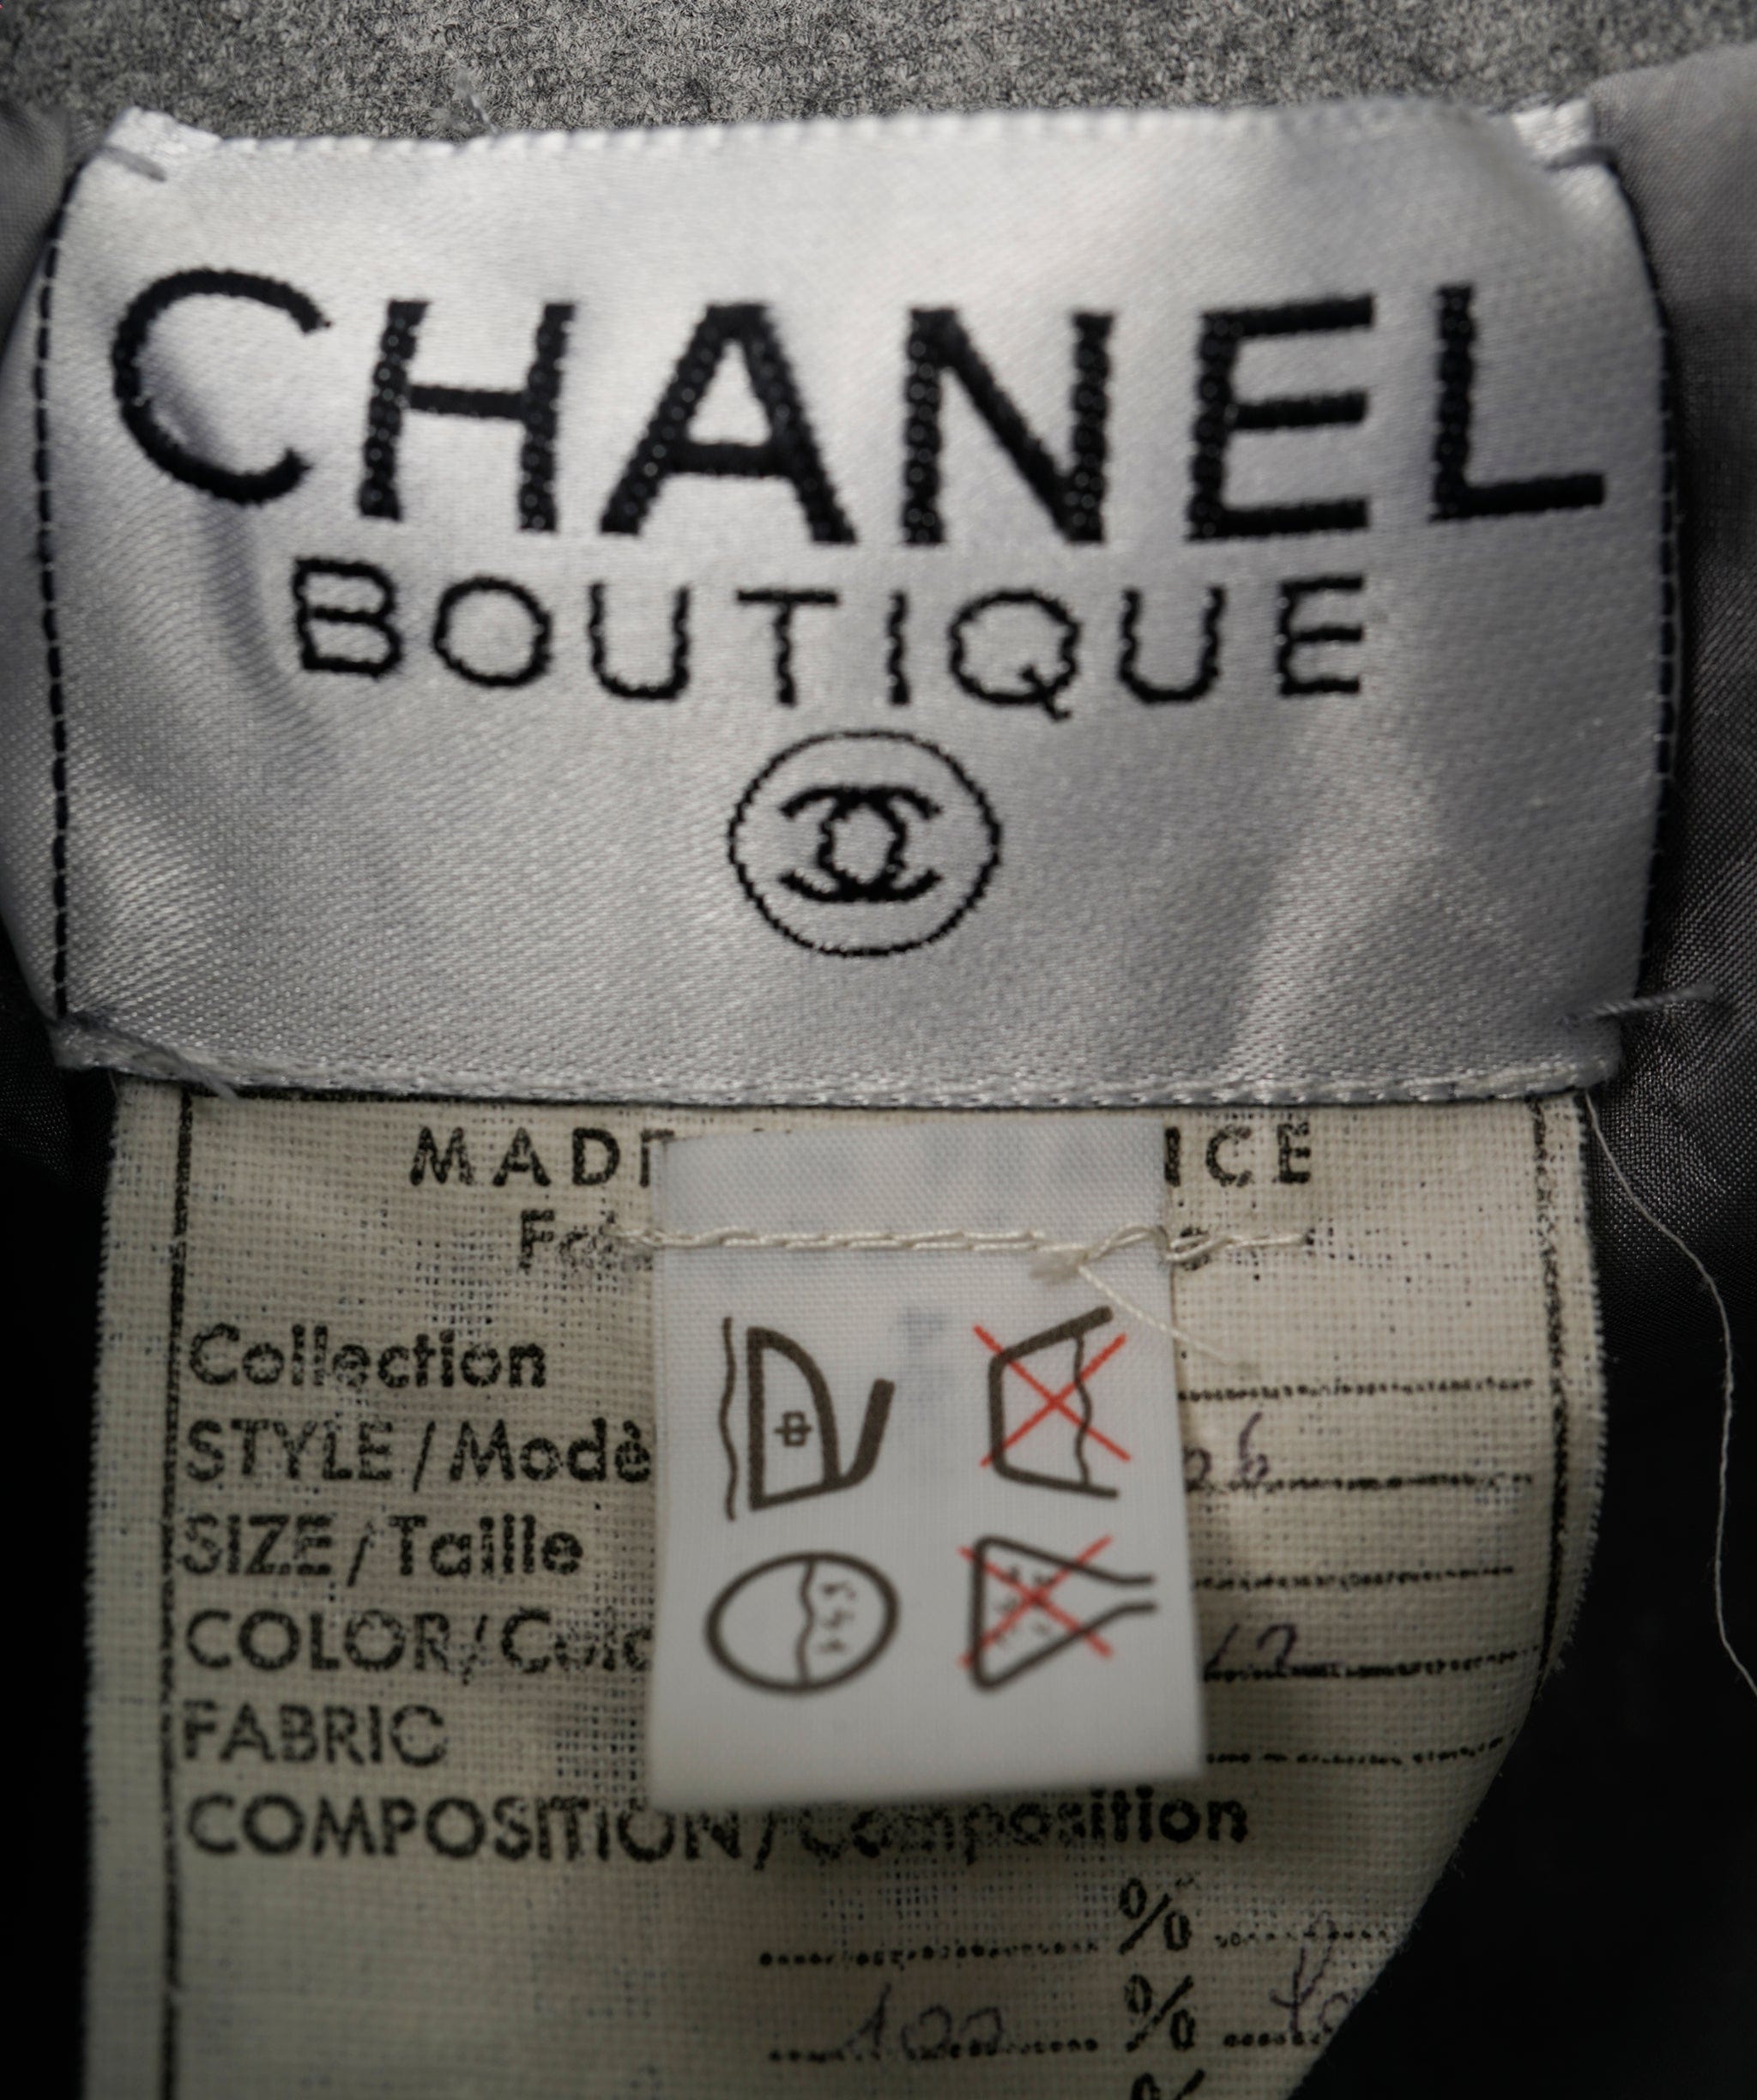 Chanel CHANEL Vintage 100% Wool Double Breasted Jacket & Skirt Suit Gray Size 36/38 #13522 AJCSC1304